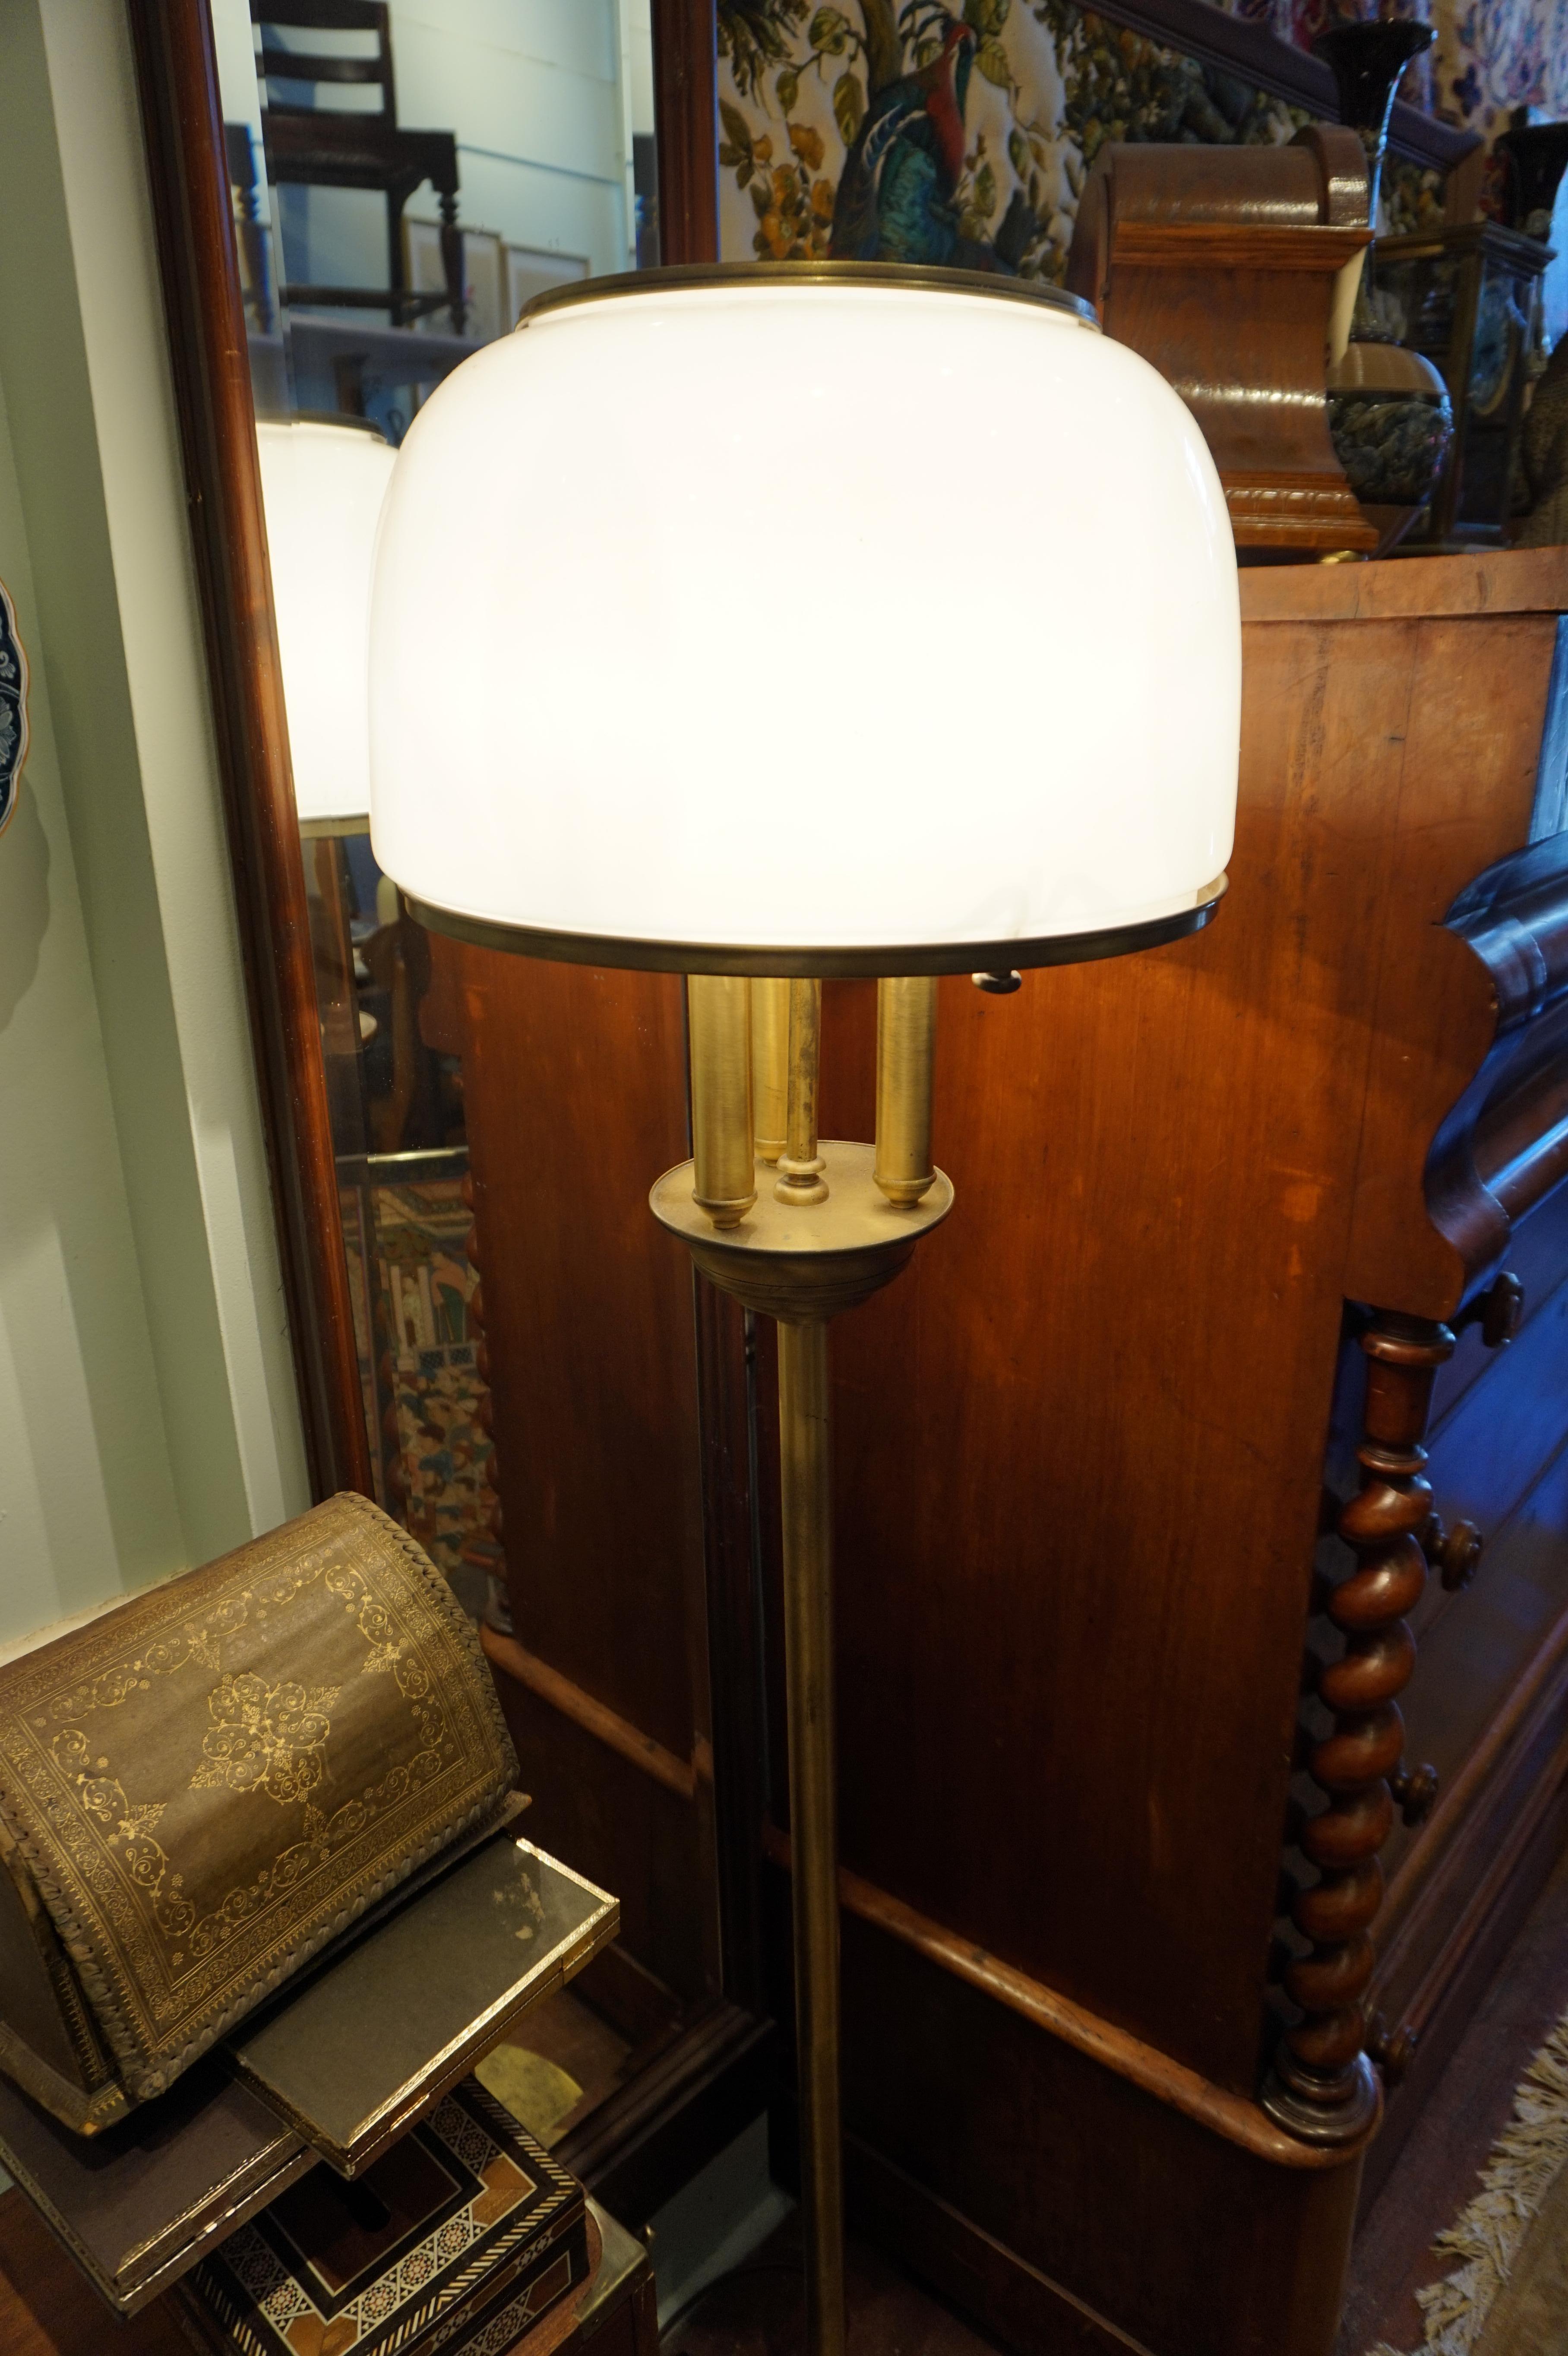 Brass lamp from the Art Deco era with original milk glass shade. Wiring renewed and converted to push pedal switch. Works well. Some patination on the brass consistent with age.

1930-1940.